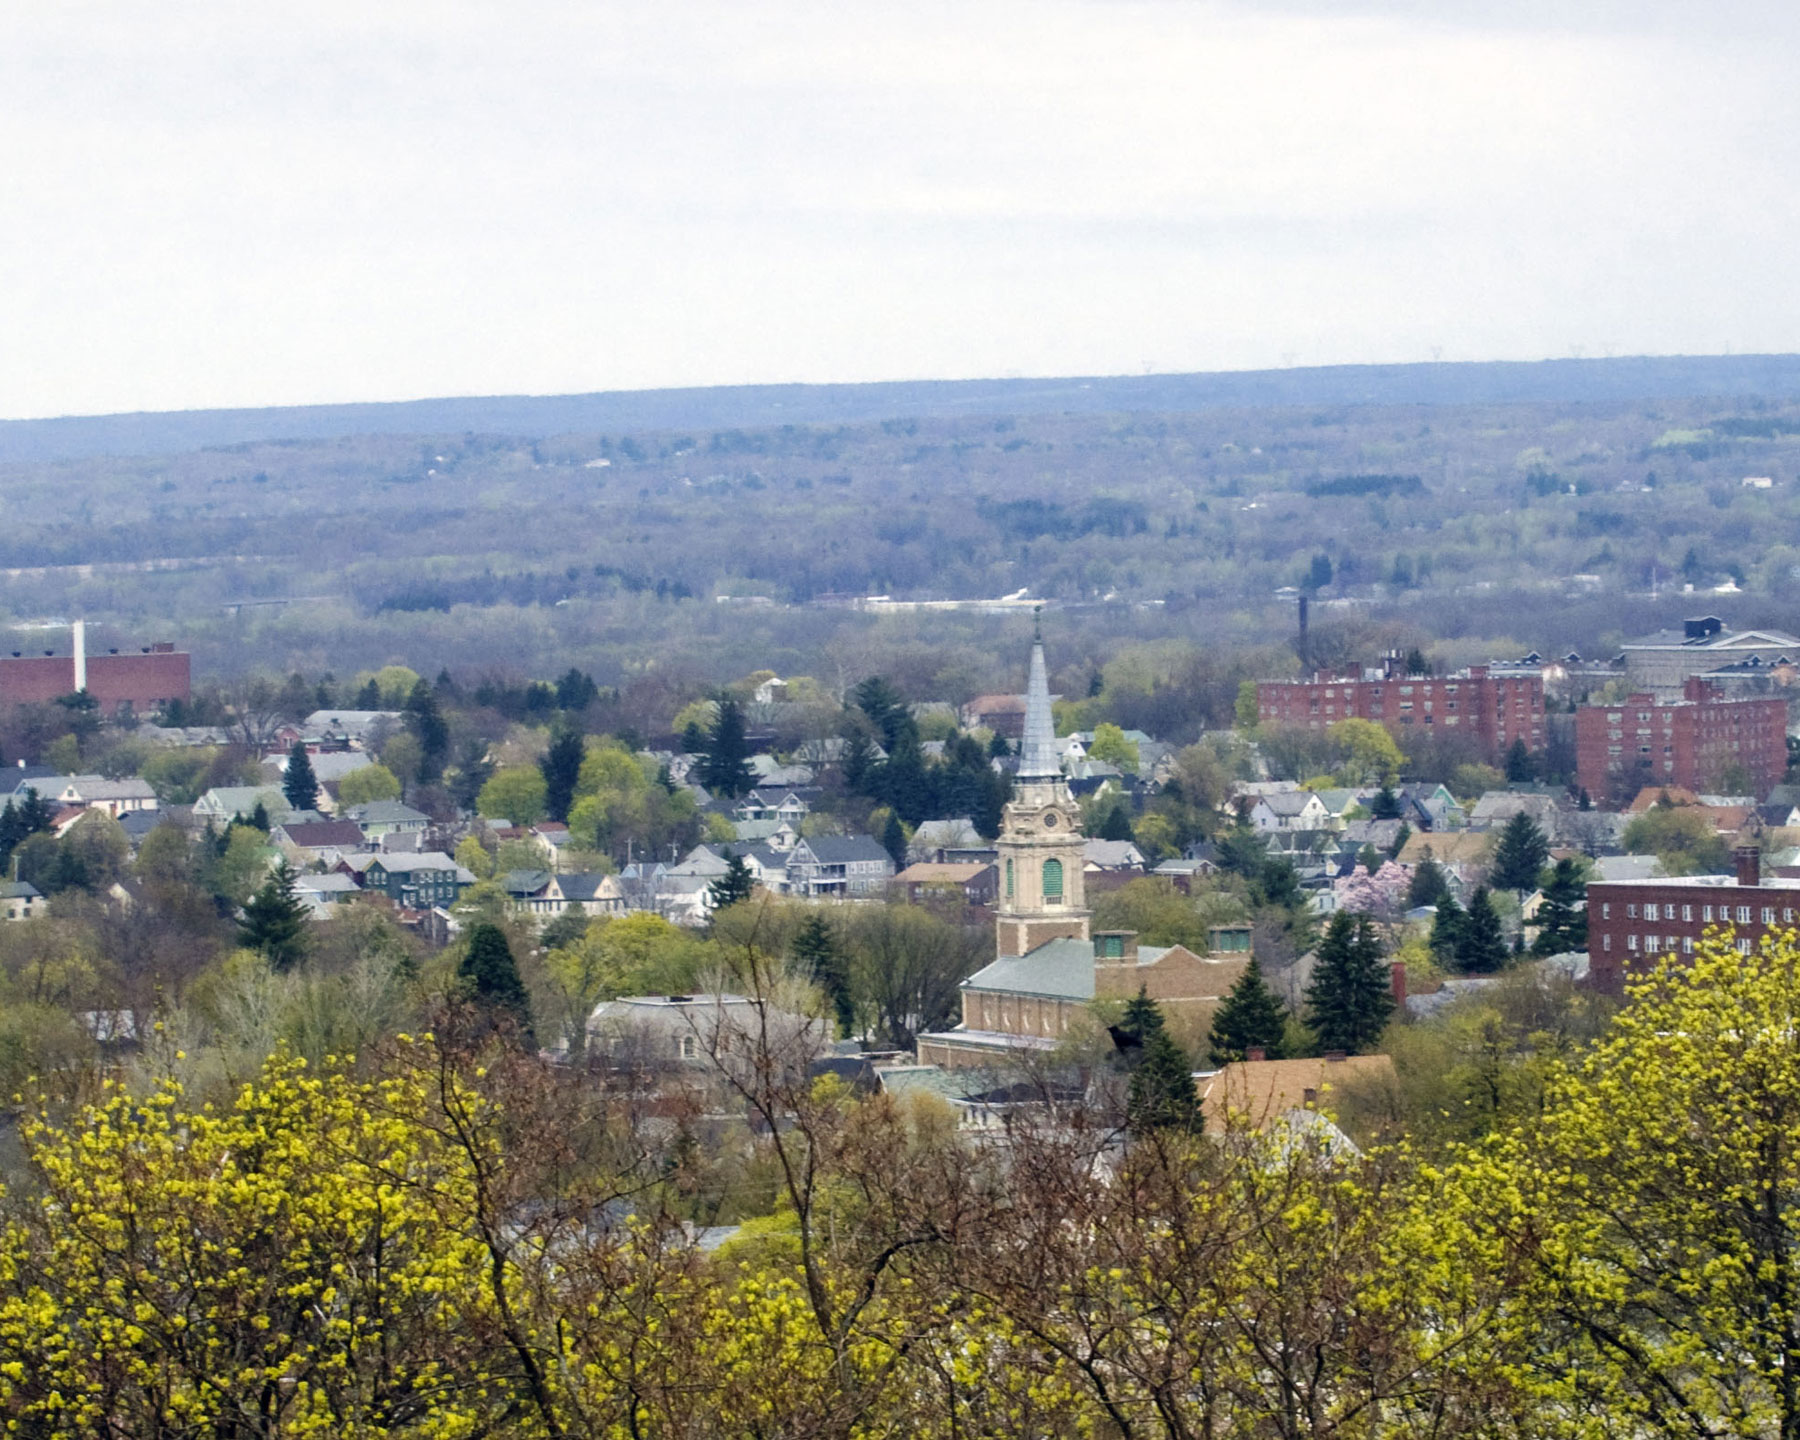 Town of New Hartford, New York - Home Page